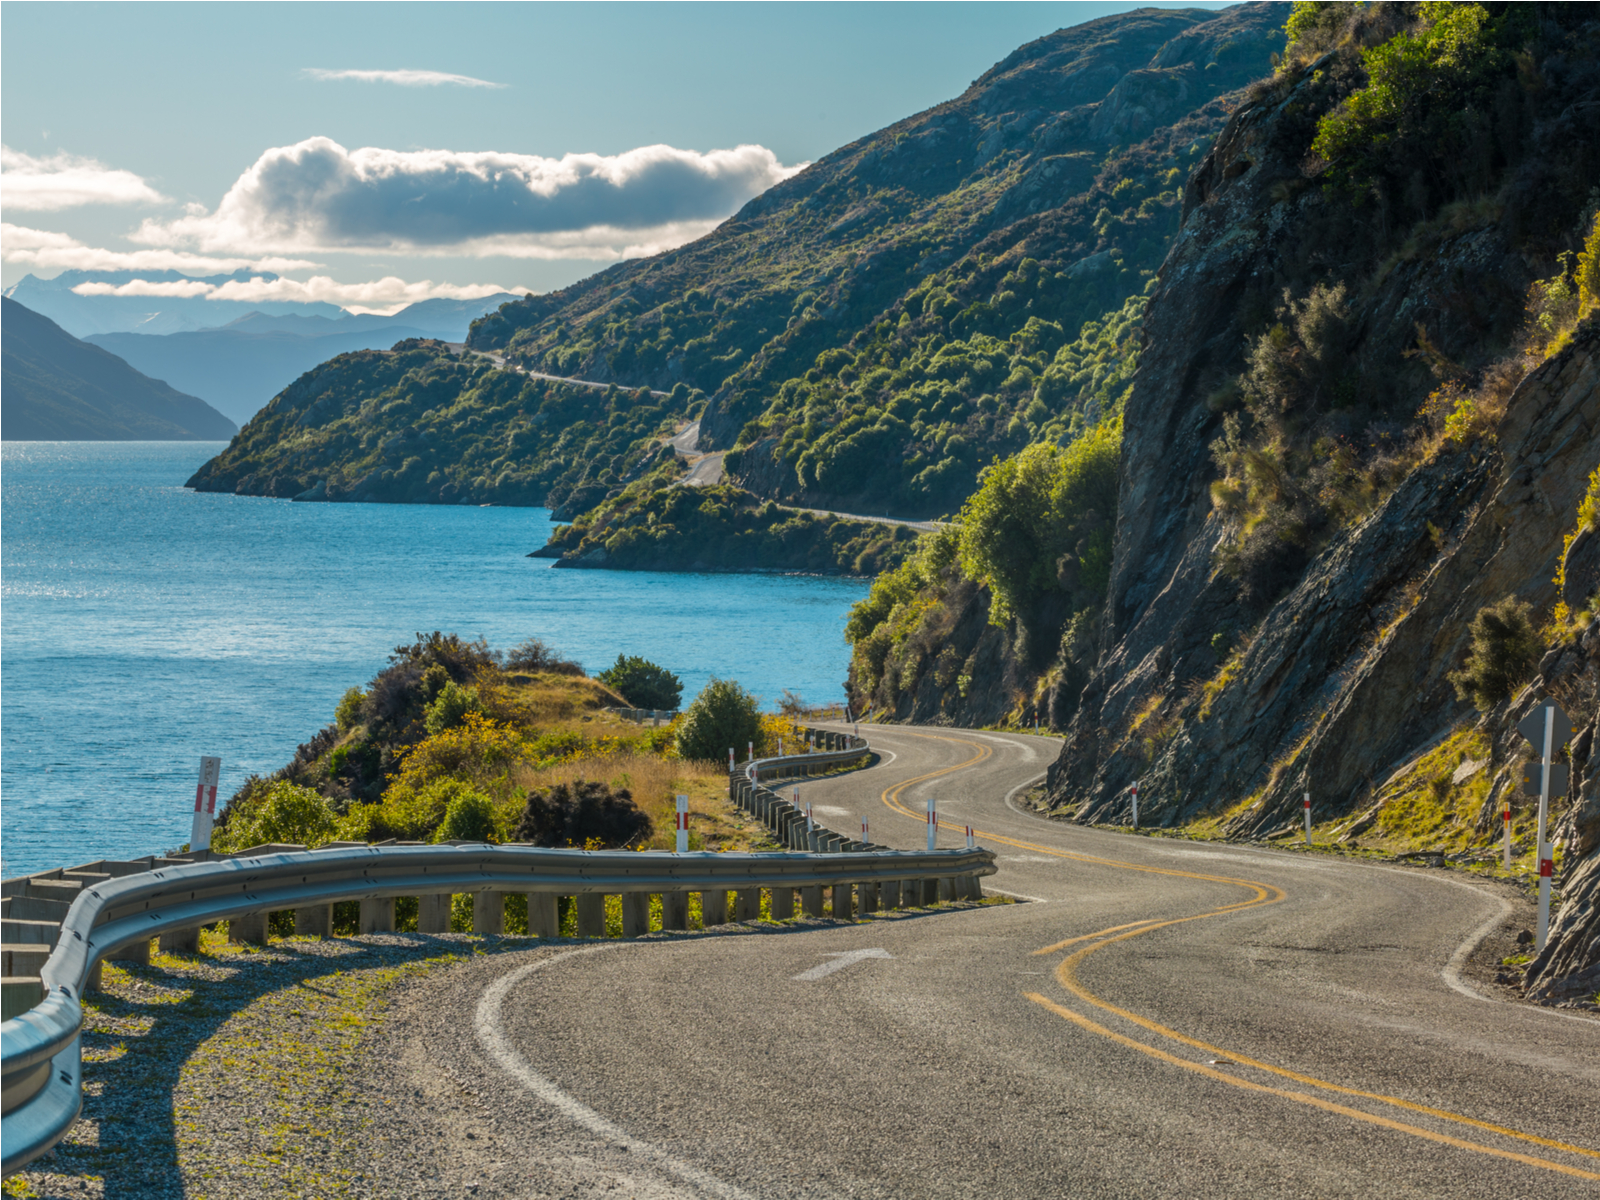 Road along Lake Wakatipu during the best time to visit New Zealand with warm weather and clear skies with few clouds